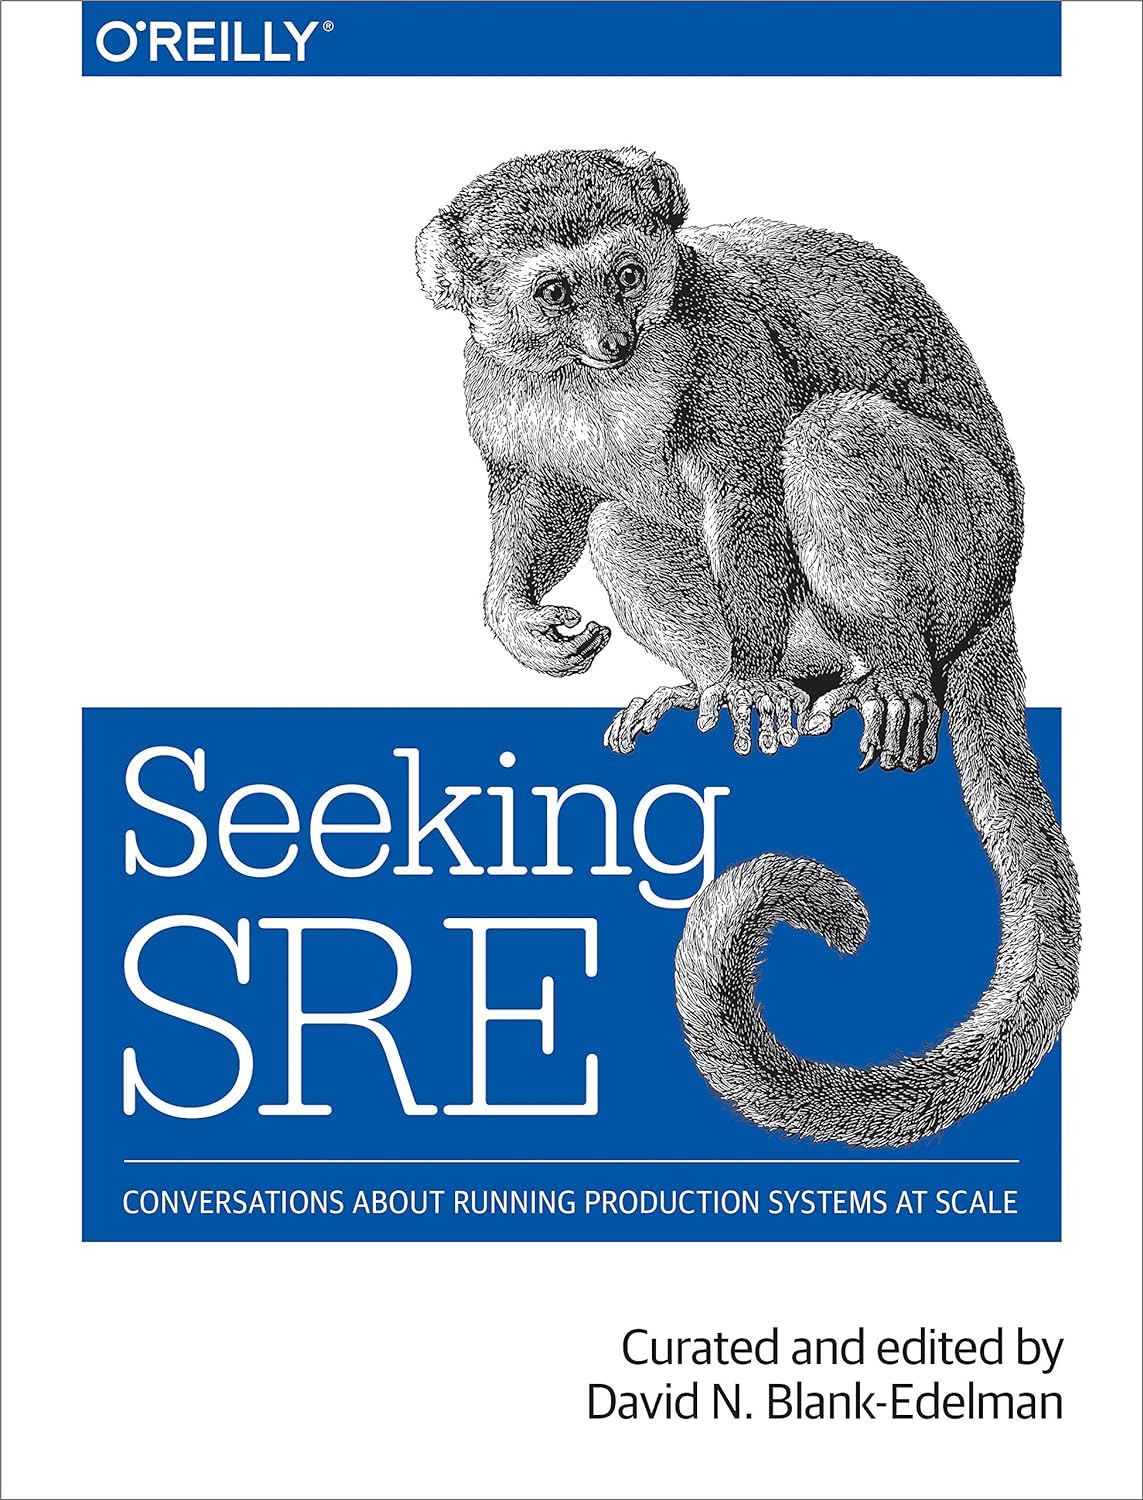 David N. Blank-Edelman: Seeking SRE: Conversations About Running Production Systems at Scale (2018, O'Reilly Media)